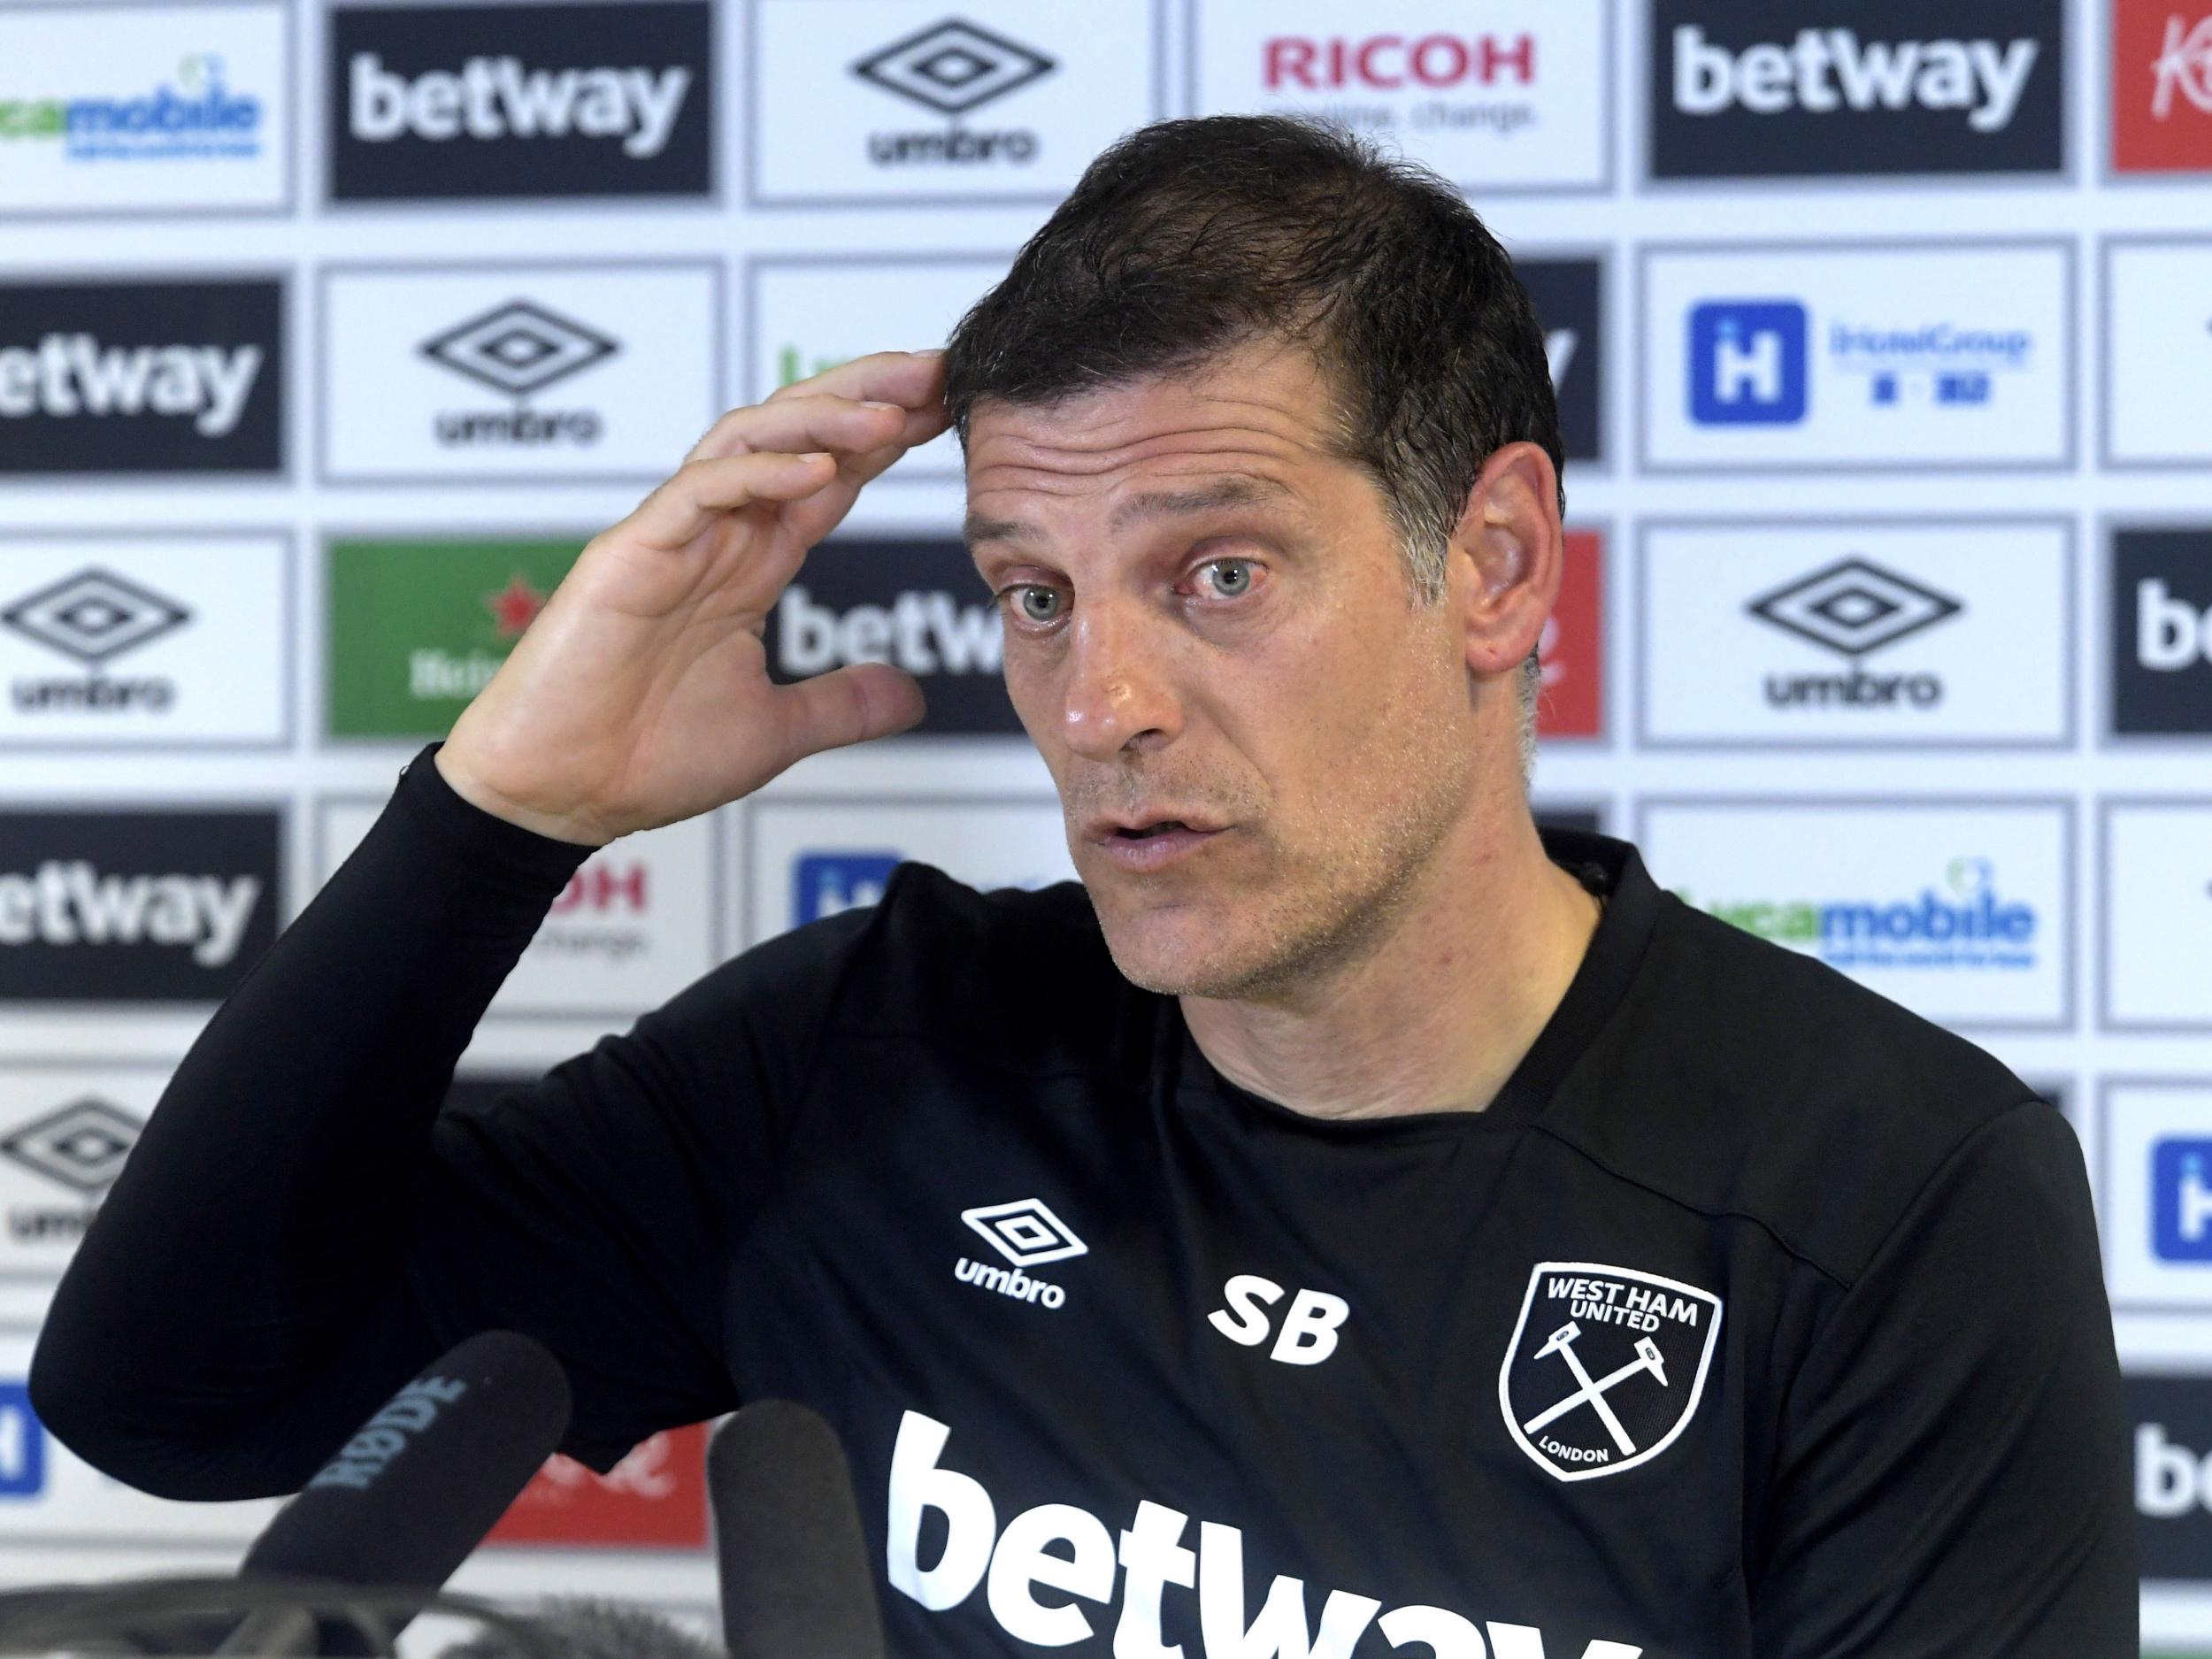 West Ham signed the four players at the top of Slaven Bilic's transfer wishlist, Sullivan says